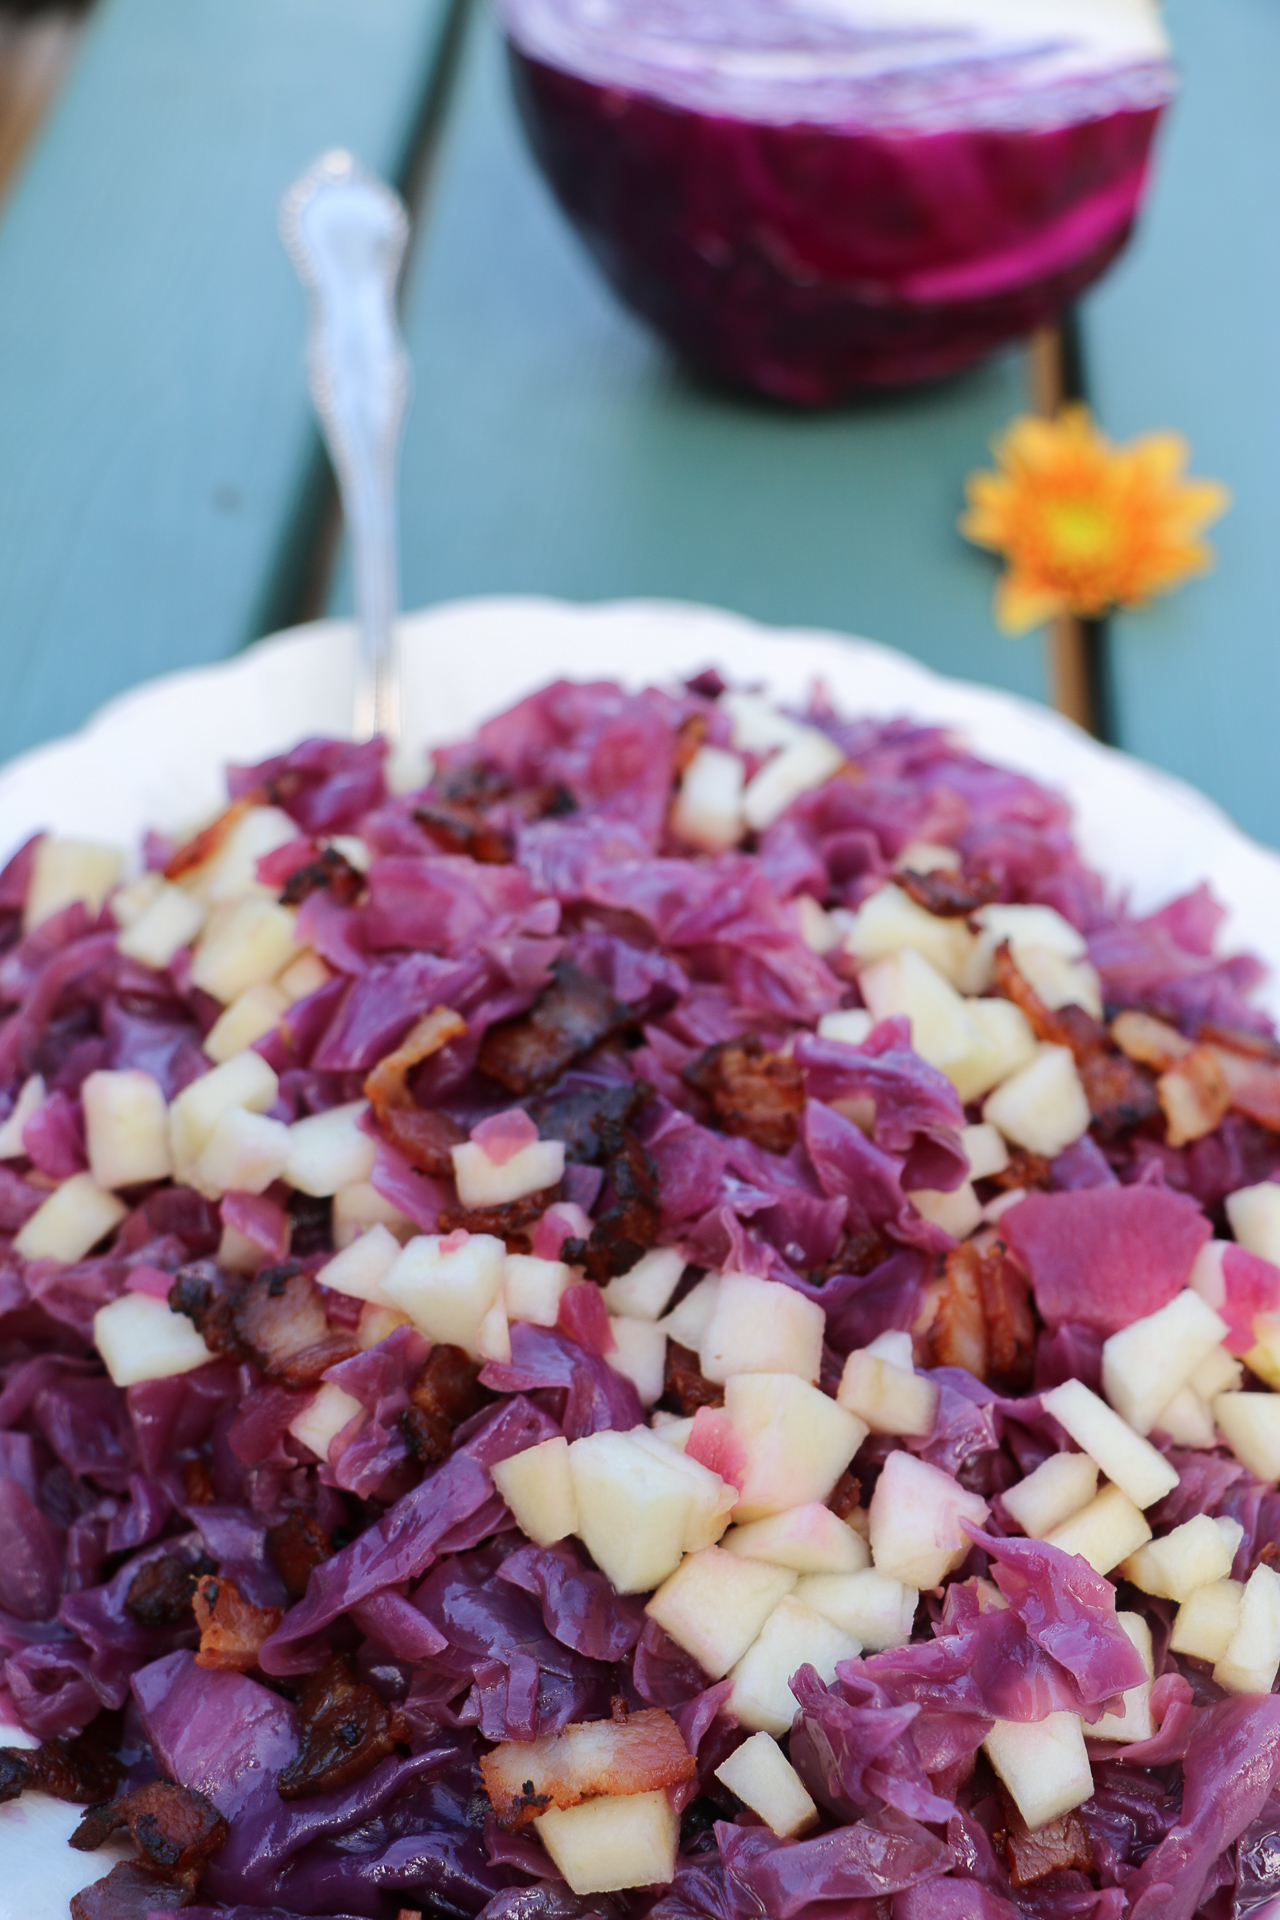 Braised Red Cabbage with Apple - Lepp Farm Market